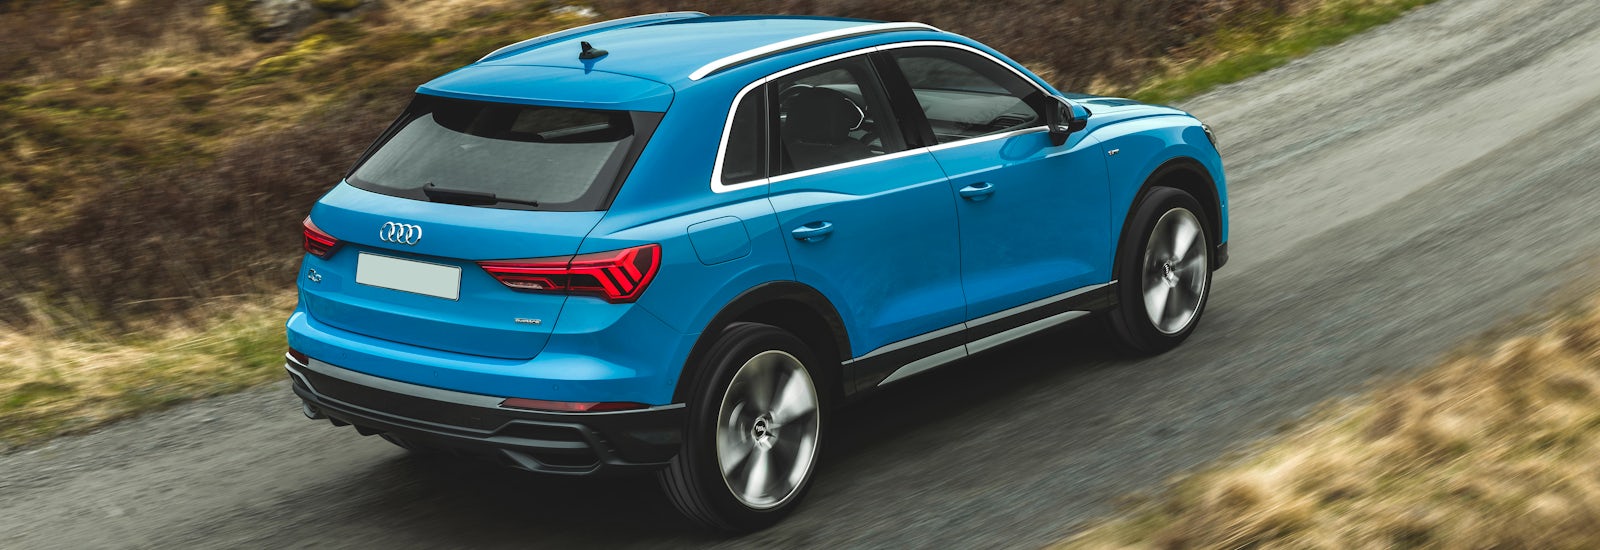 2018 Audi Q3 | price, specs and release date | carwow